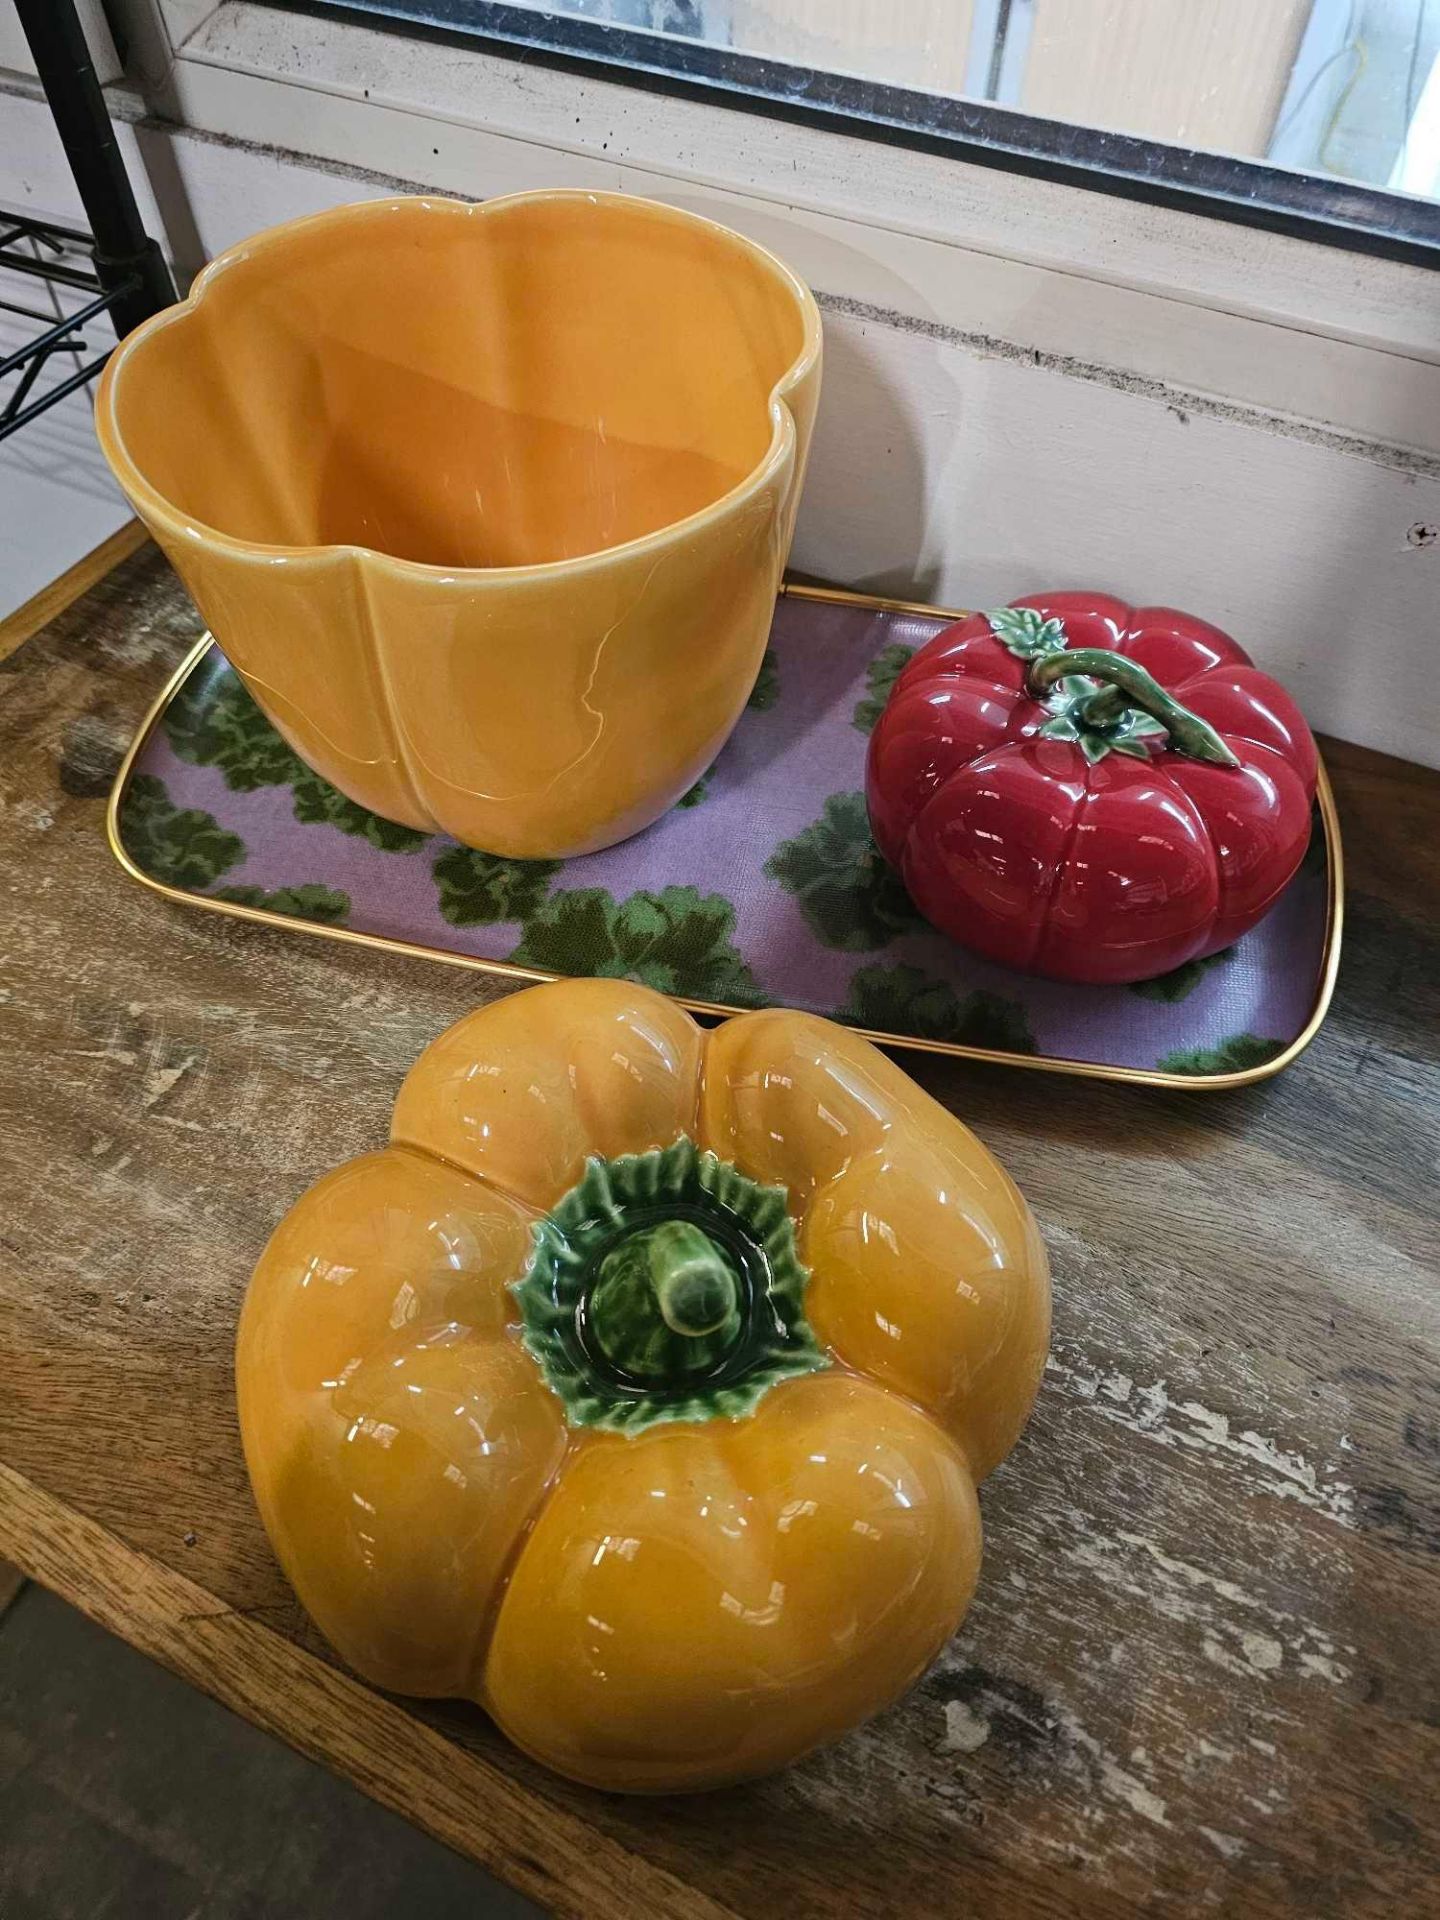 Decorative Objects To Include A Ceramic Yellow Pepper, Red Tomato And A Floral Patterned Purple/ - Bild 3 aus 3